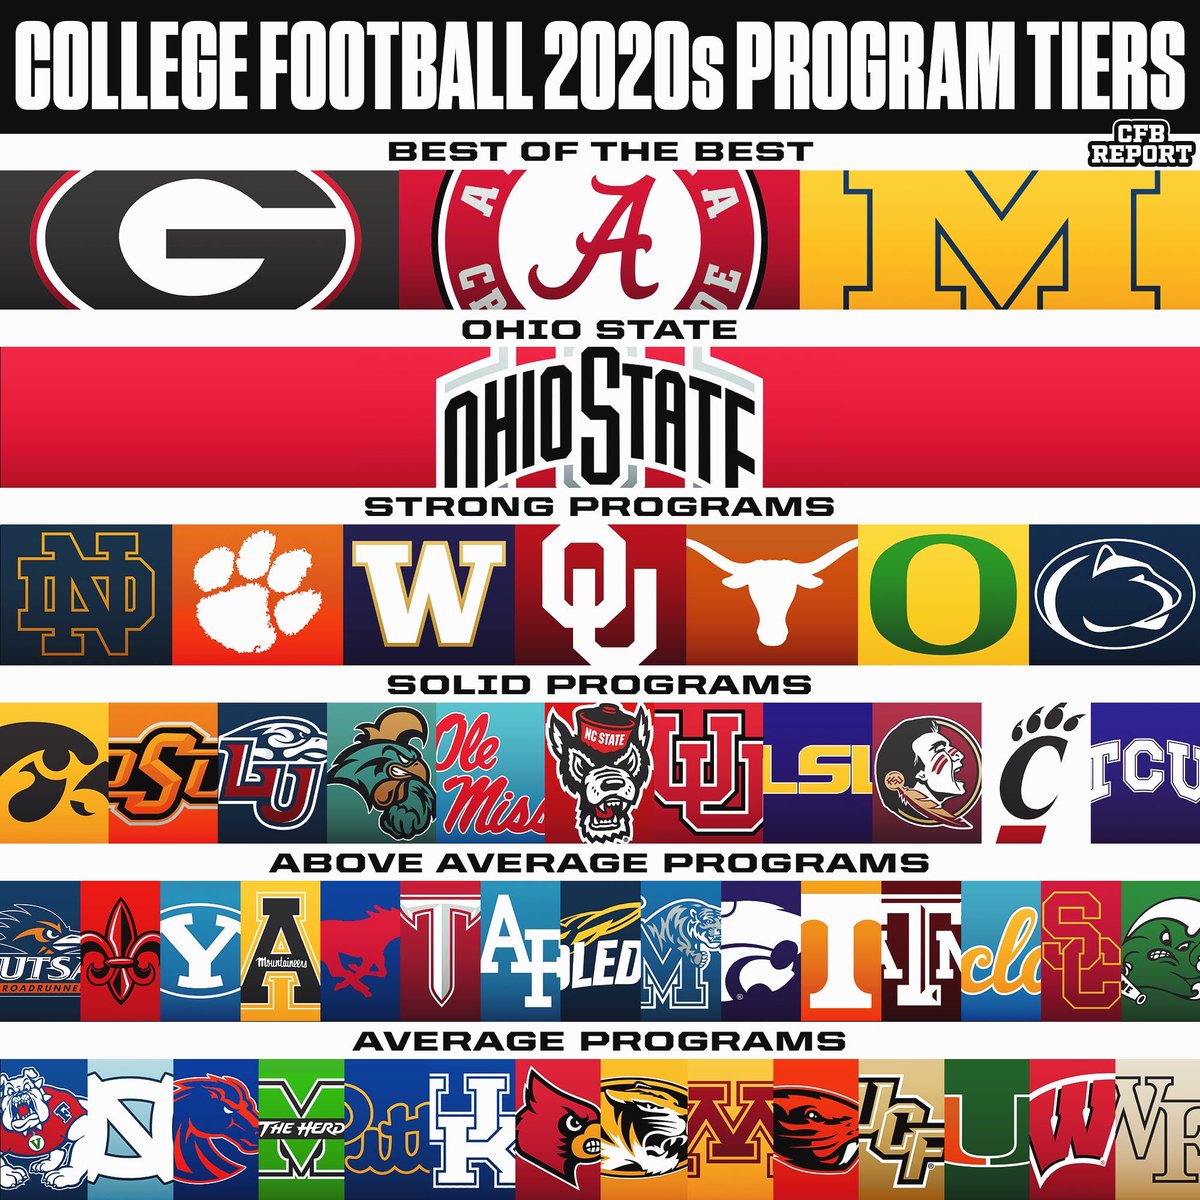 College Football Program Tiers of the 2020’s 🏈 (2020-Now)